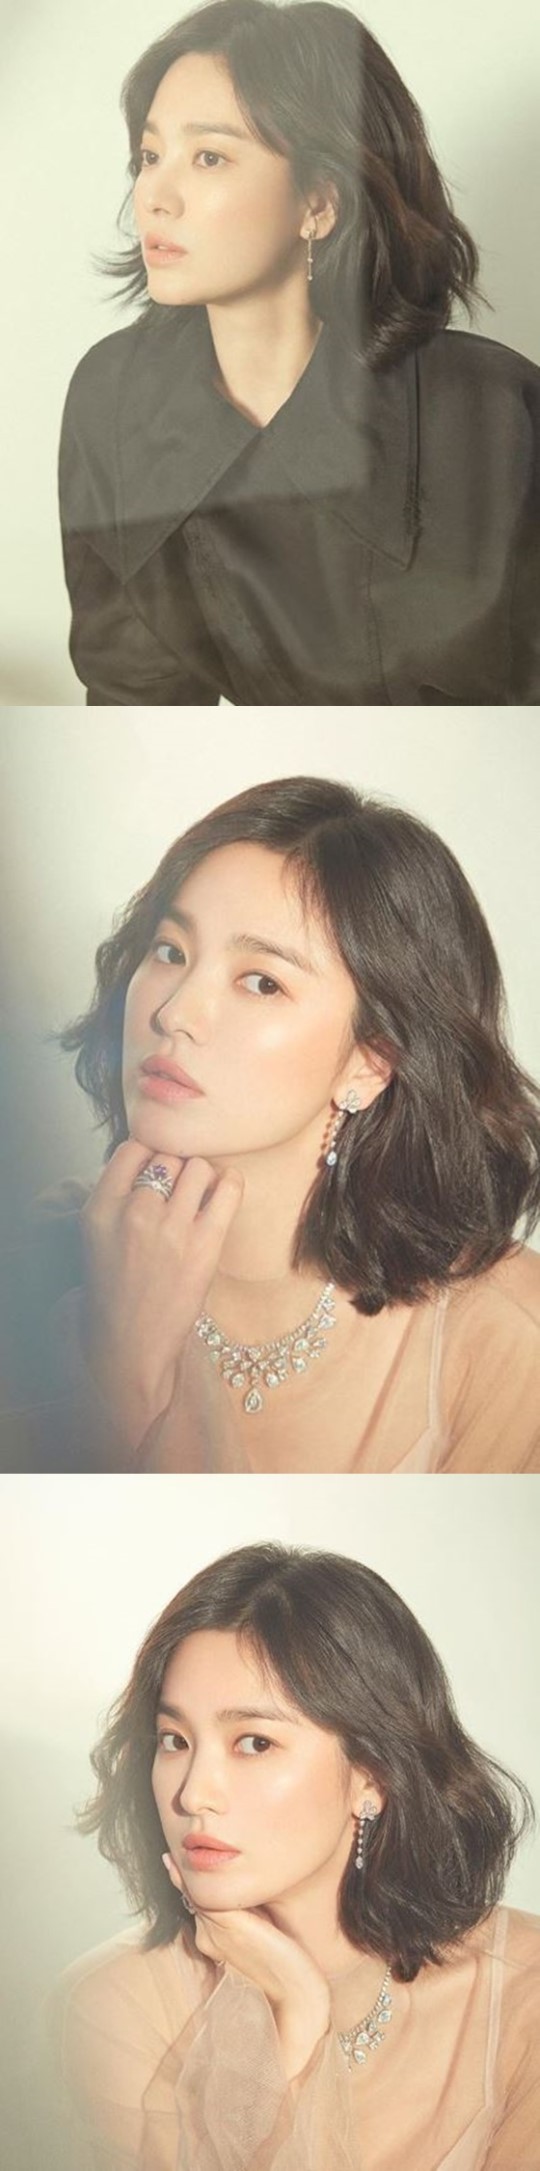 Actor Song Hye-kyo has unveiled a new photo.Song Hye-kyo posted several photos on his 16th day with an article called B-cut in his instagram.Song Hye-kyo in the photo is staring at the camera with an alluring look, showing off her goddess-class beauty despite her somewhat distracted gaze.The netizens responded such as B cut picture, Hyegyo goddess and How can I take it?Song Hye-kyo is reviewing his next work after TVN drama Boyfriend which last January.